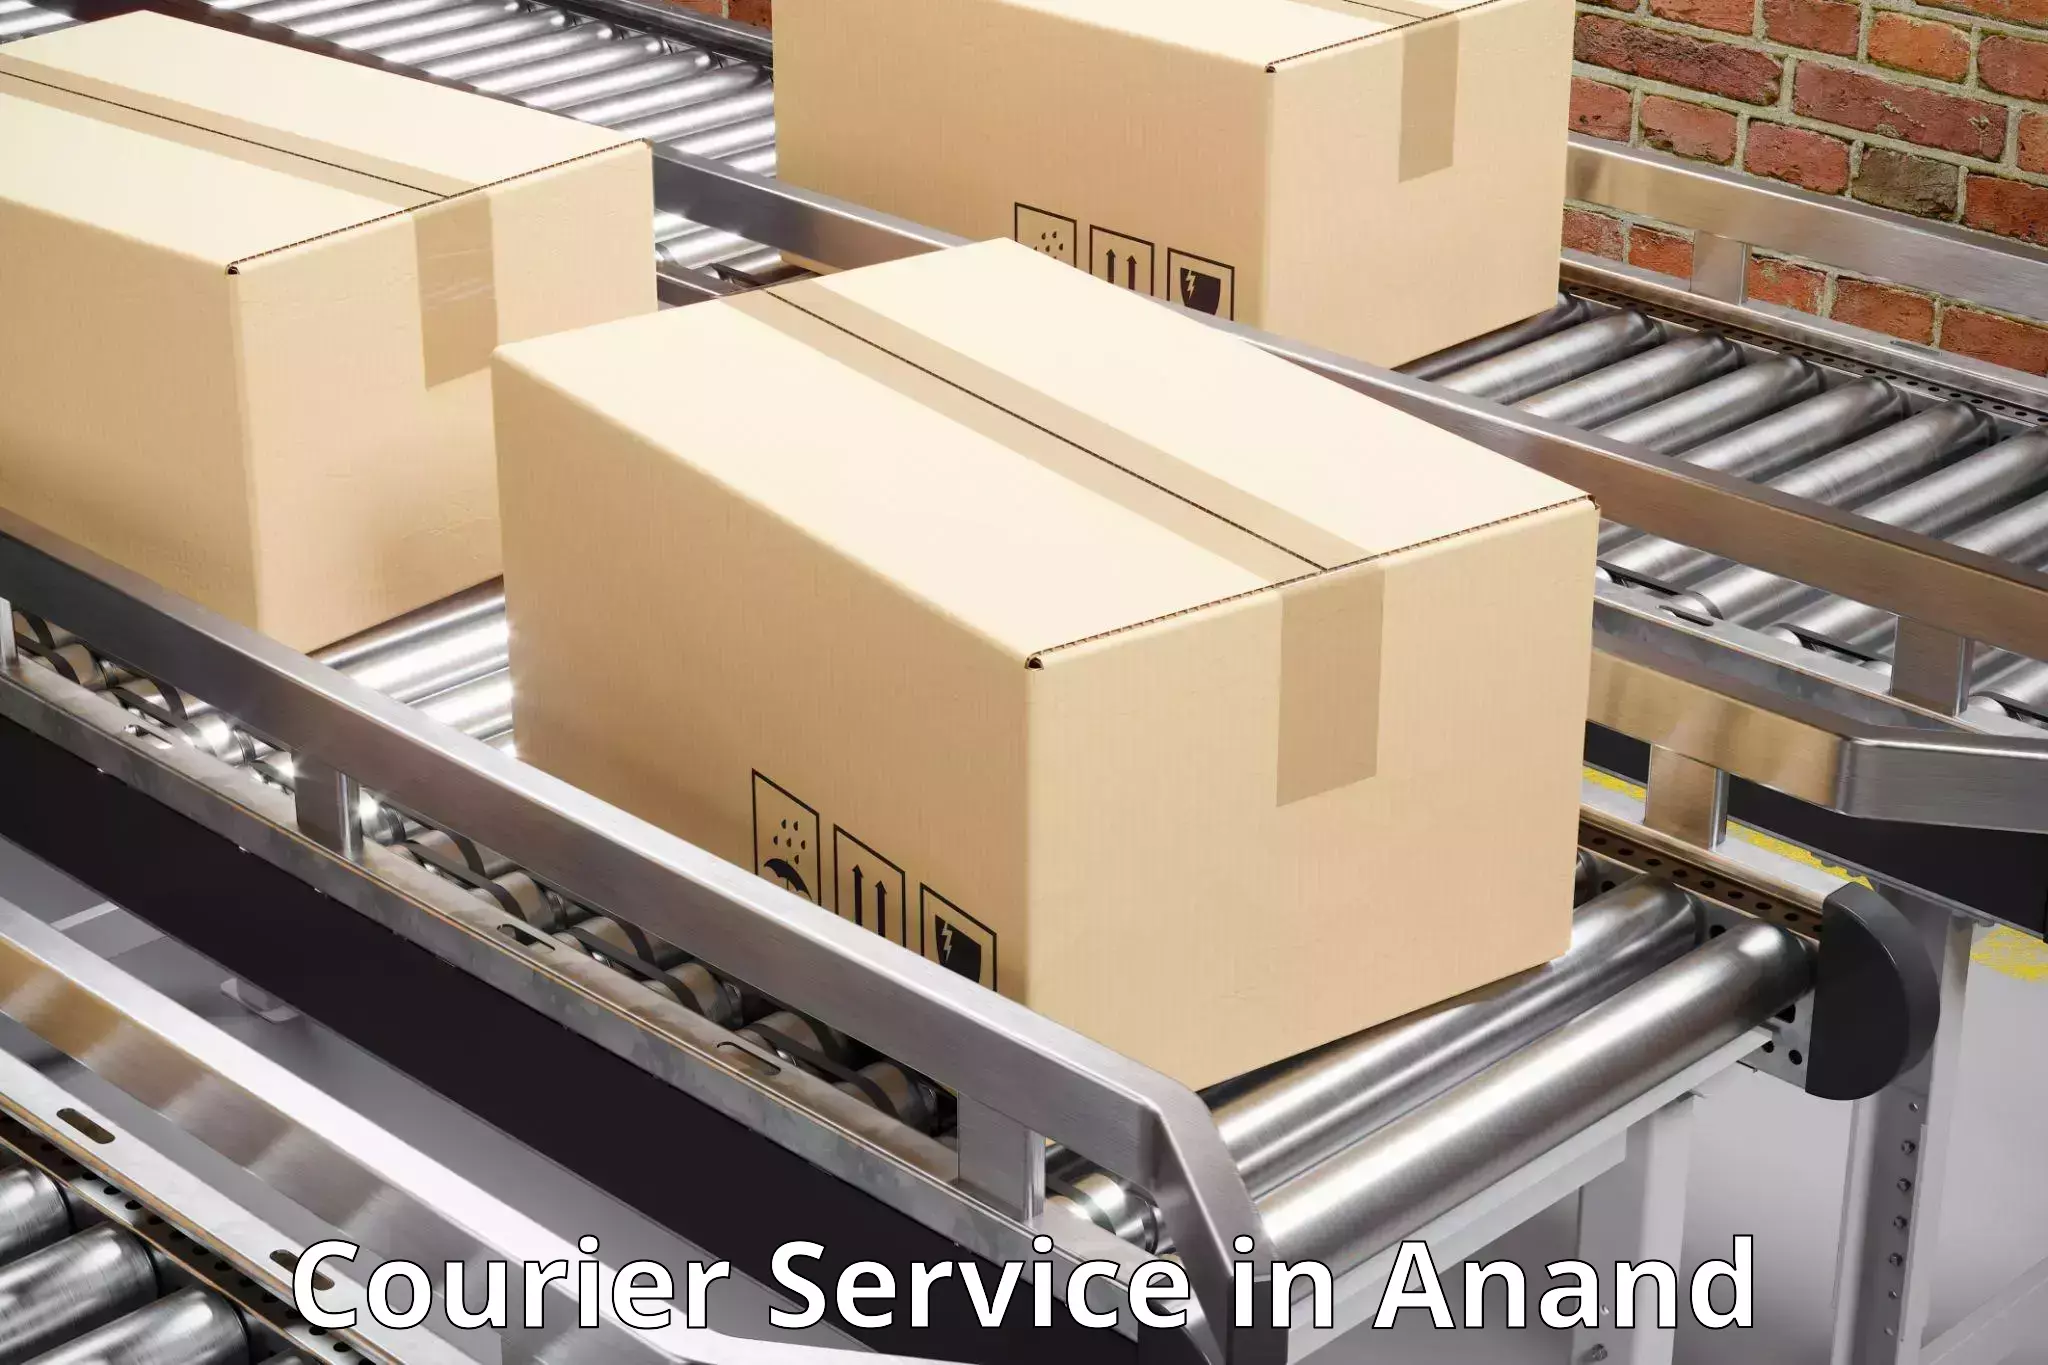 Reliable parcel services in Anand